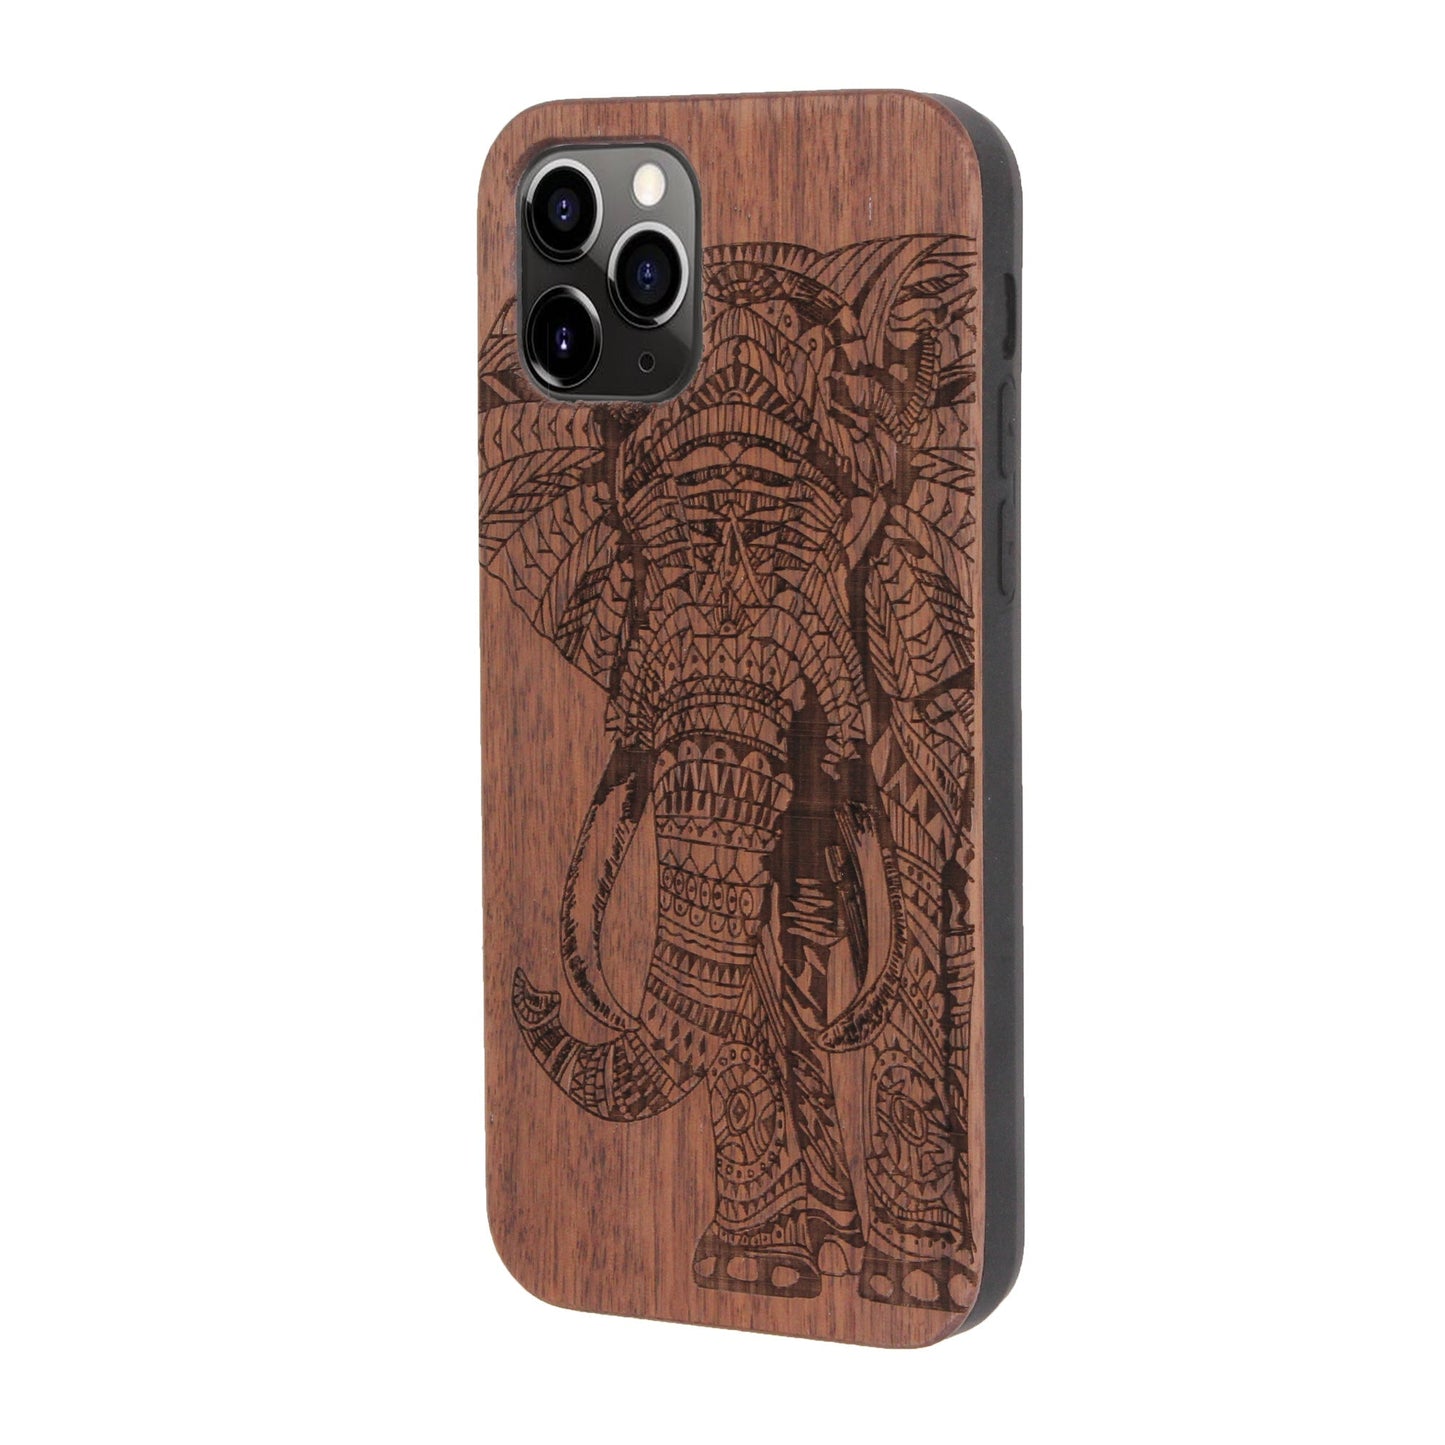 Elephant Eden case made of walnut wood for iPhone 11 Pro